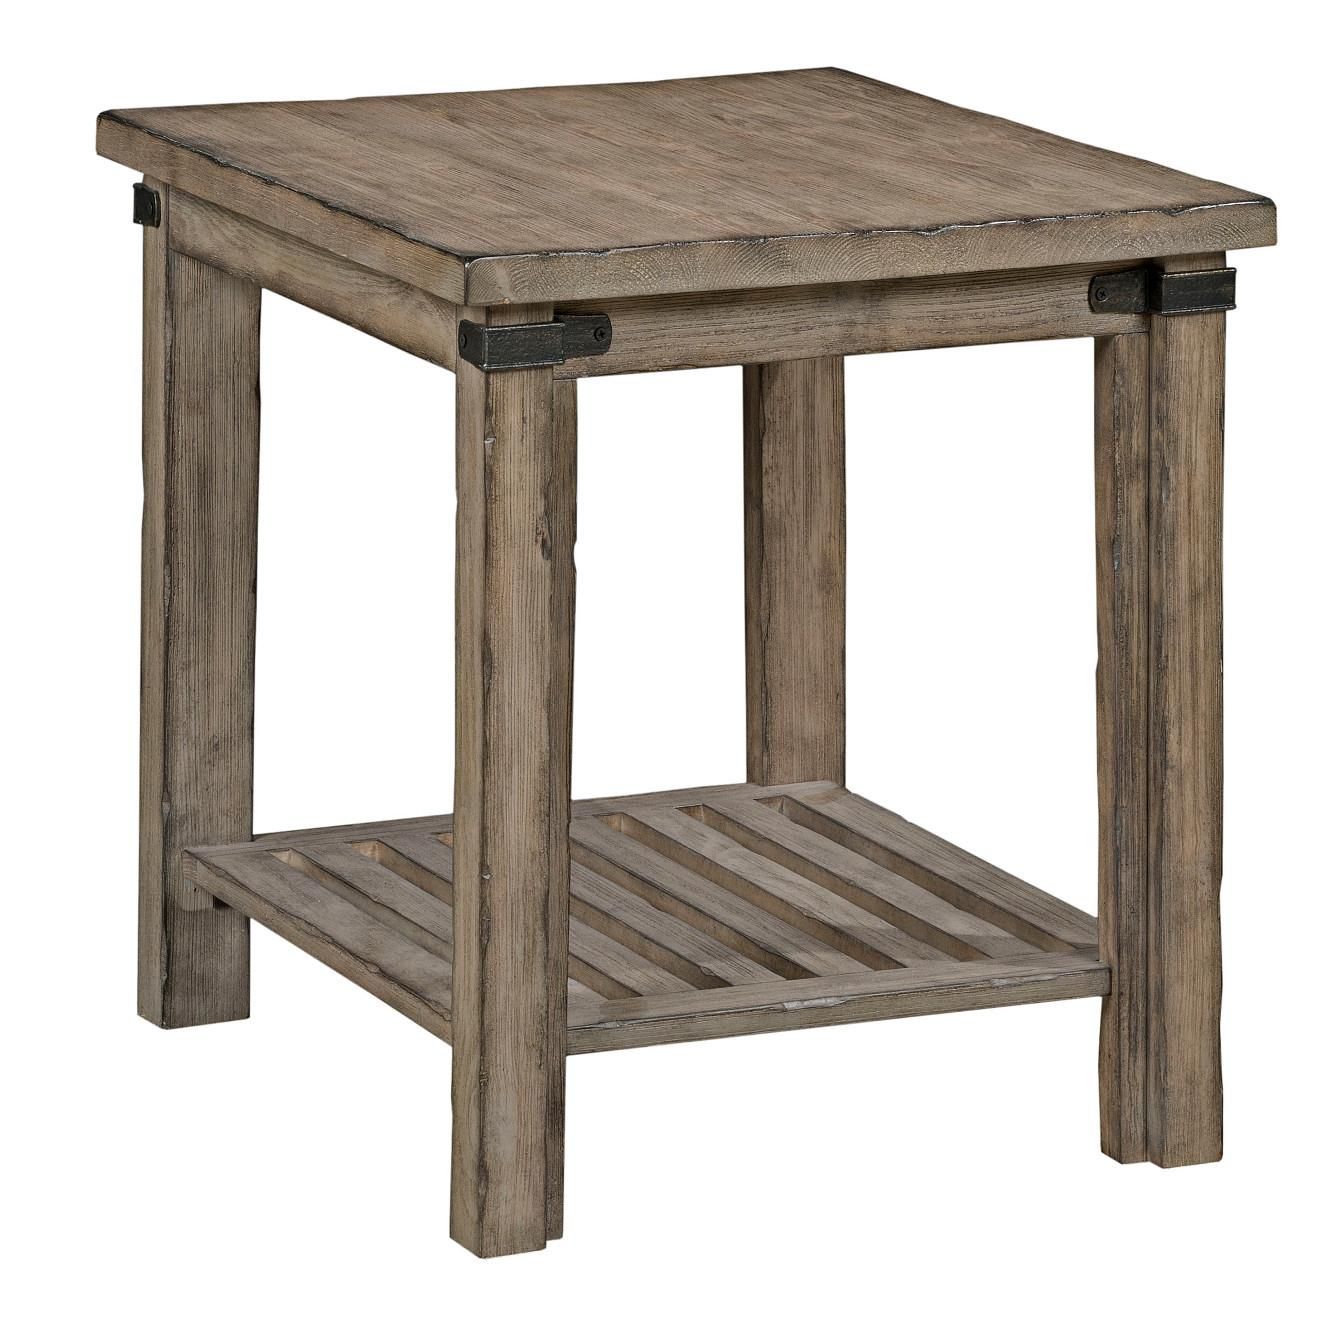 Kincaid Furniture Foundry Rustic Weathered Gray End Table | Belfort With Rustic Gray End Tables (Gallery 6 of 20)